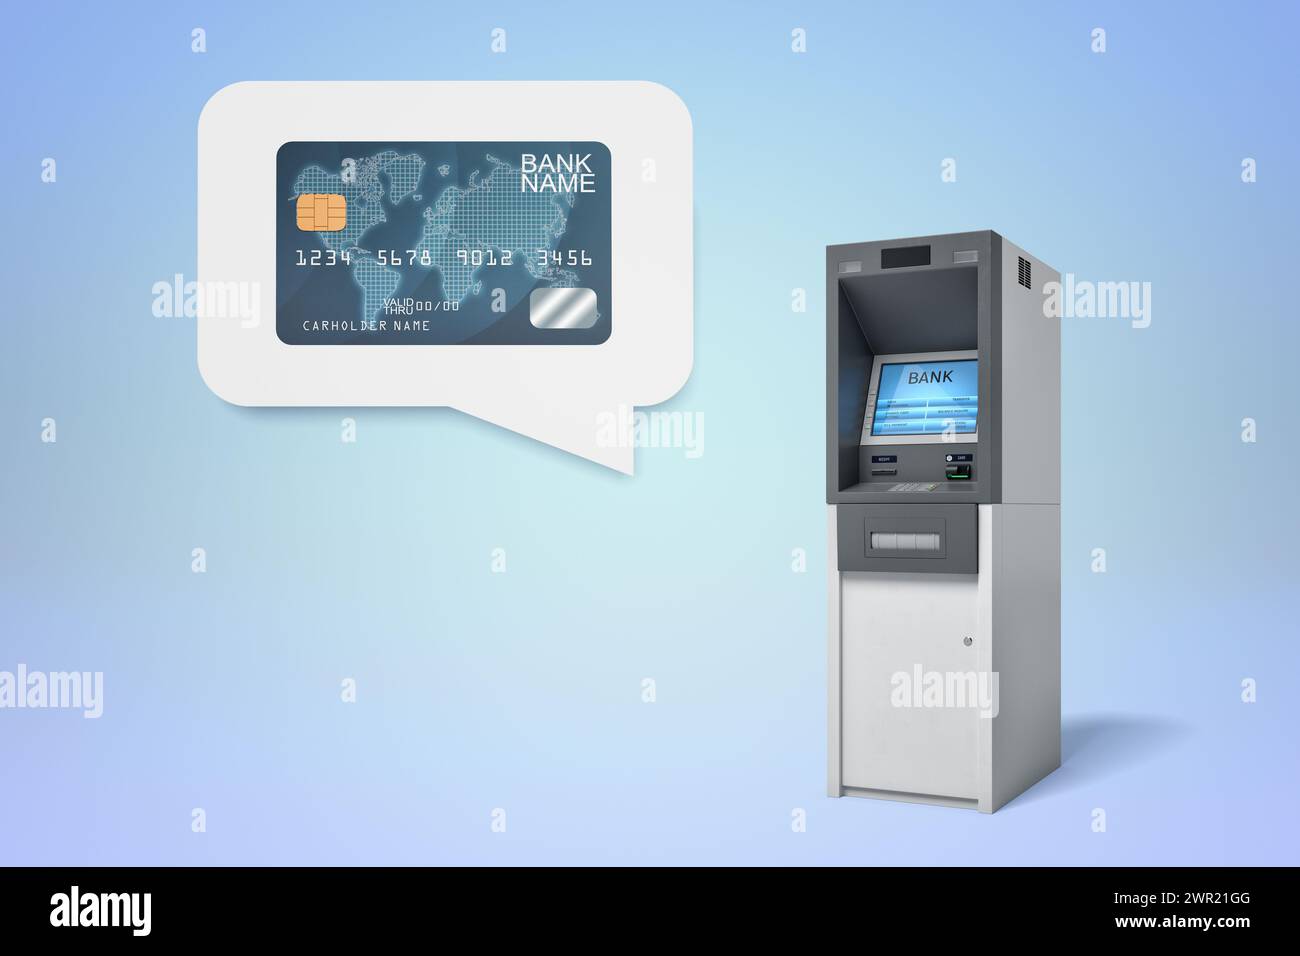 Credit card and ATM concept illustration Stock Photo